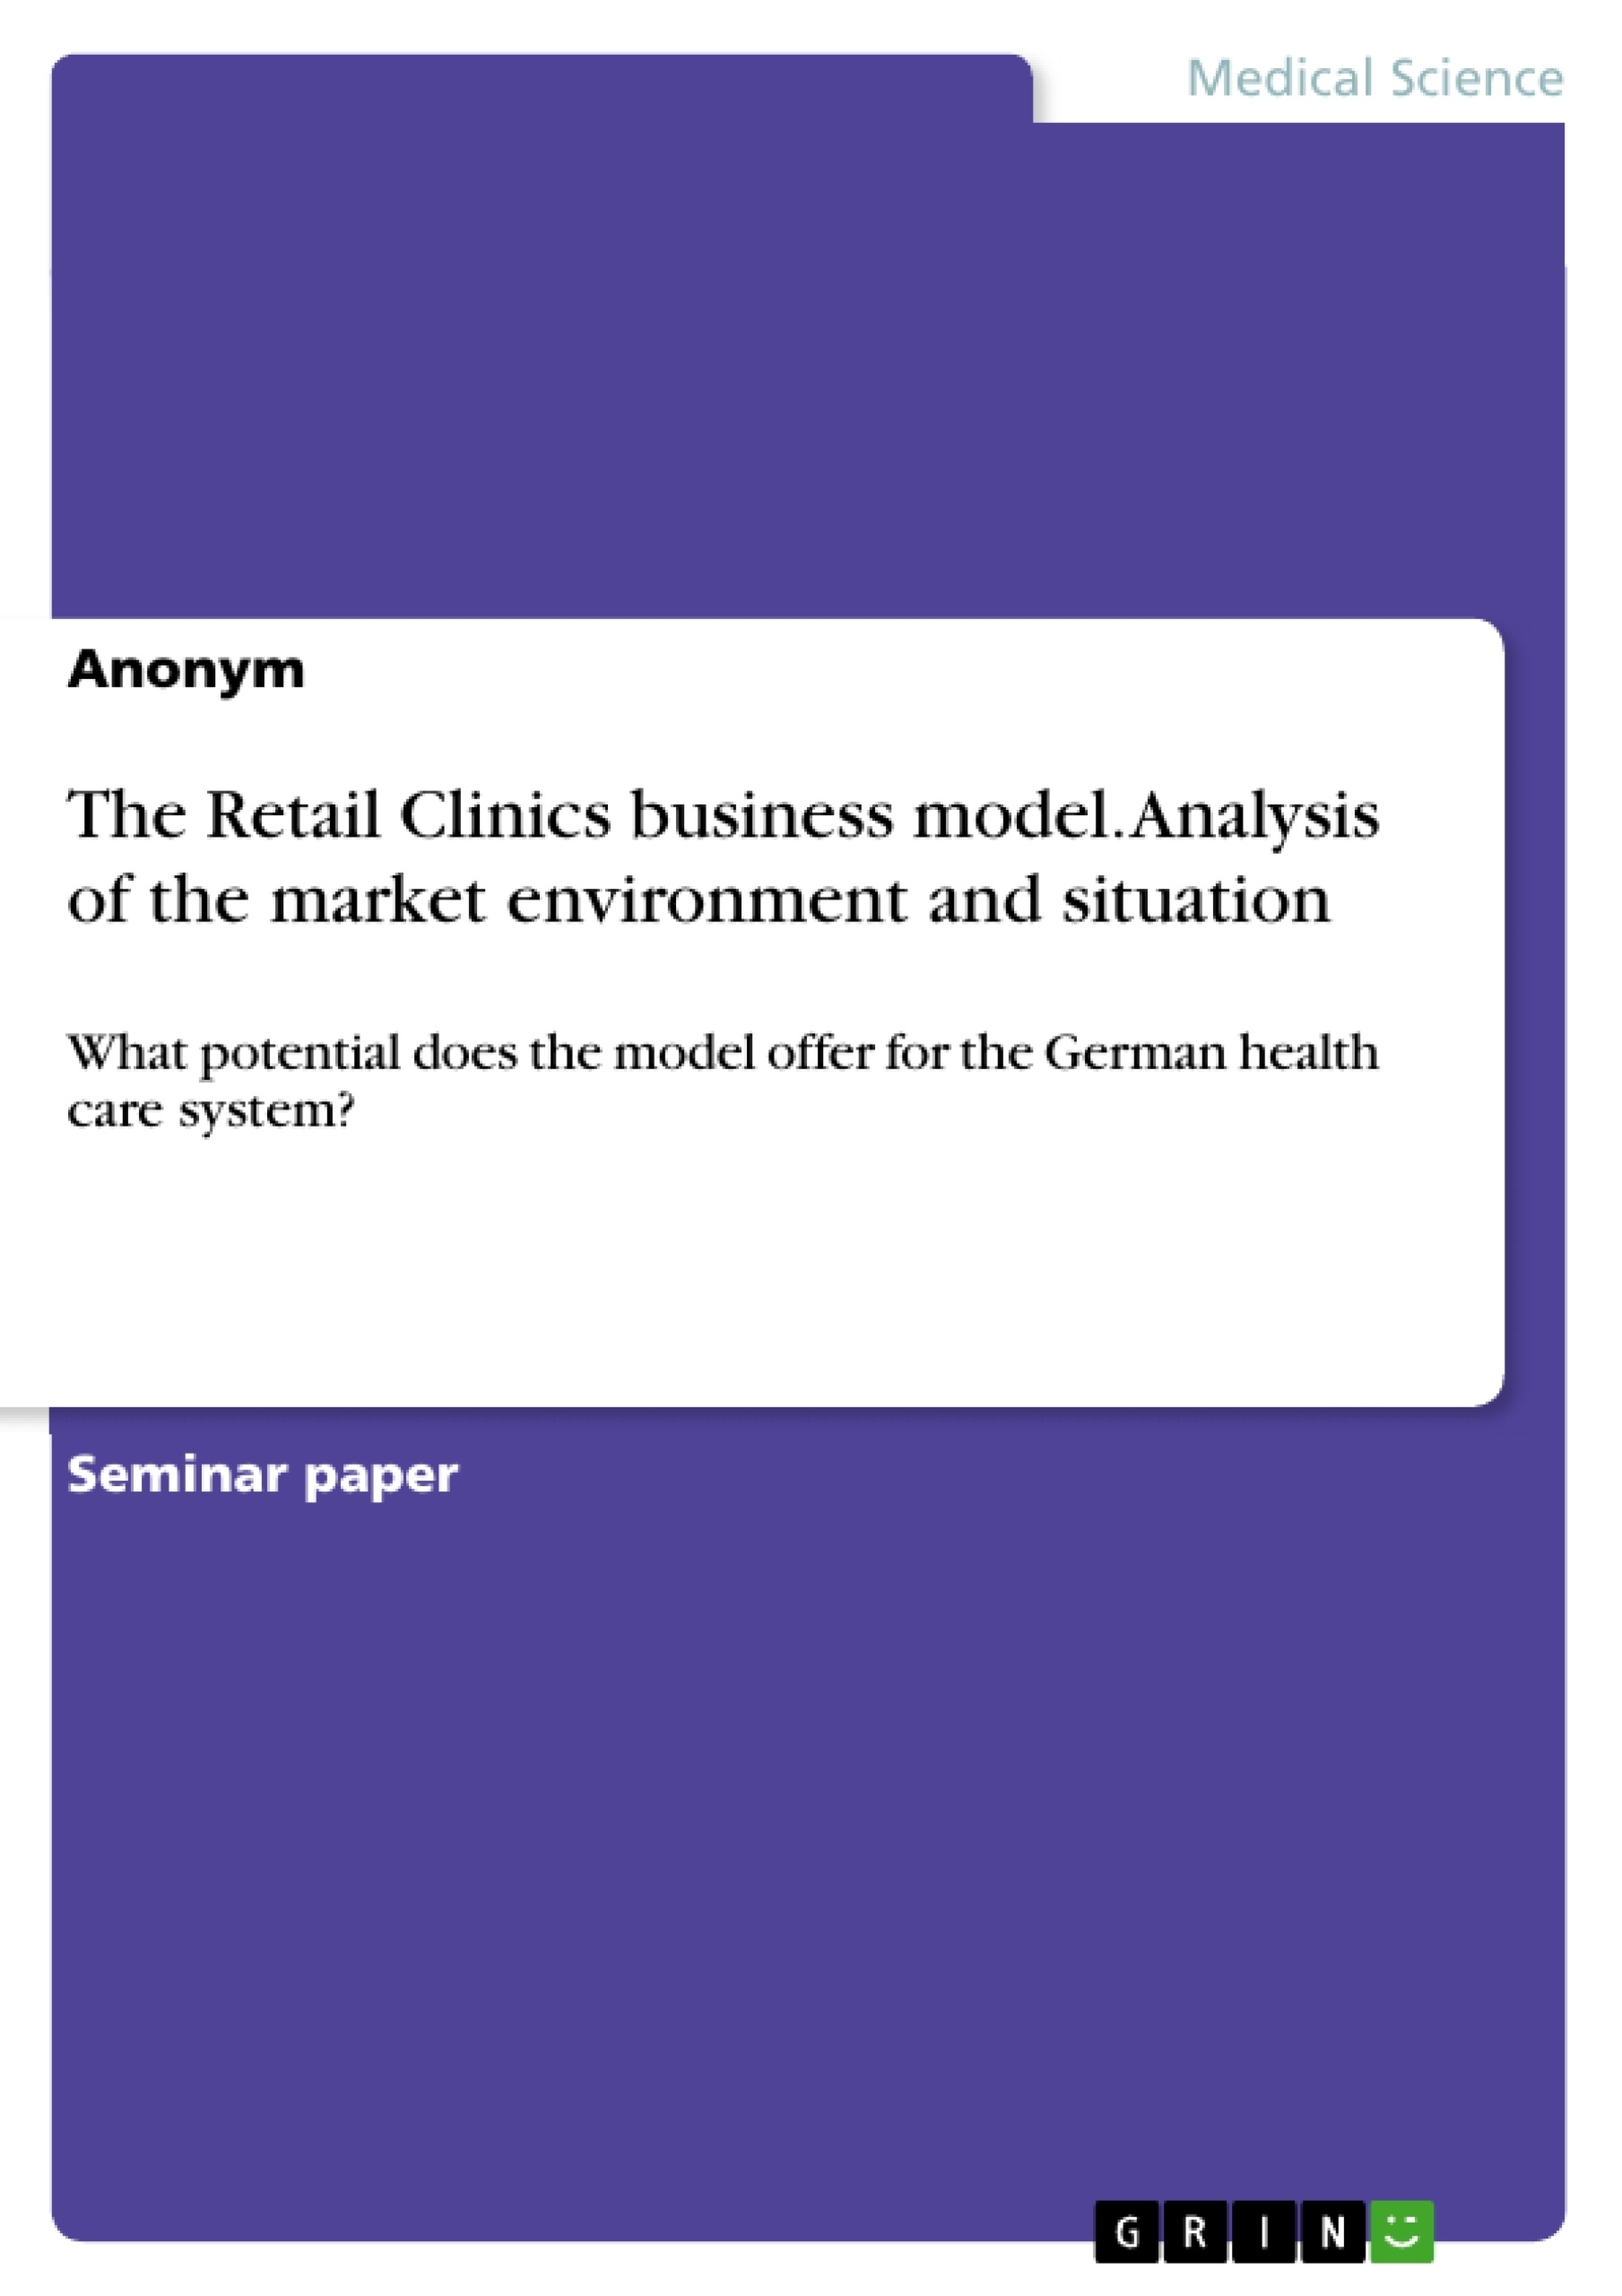 Title: The Retail Clinics business model. Analysis of the market environment and situation